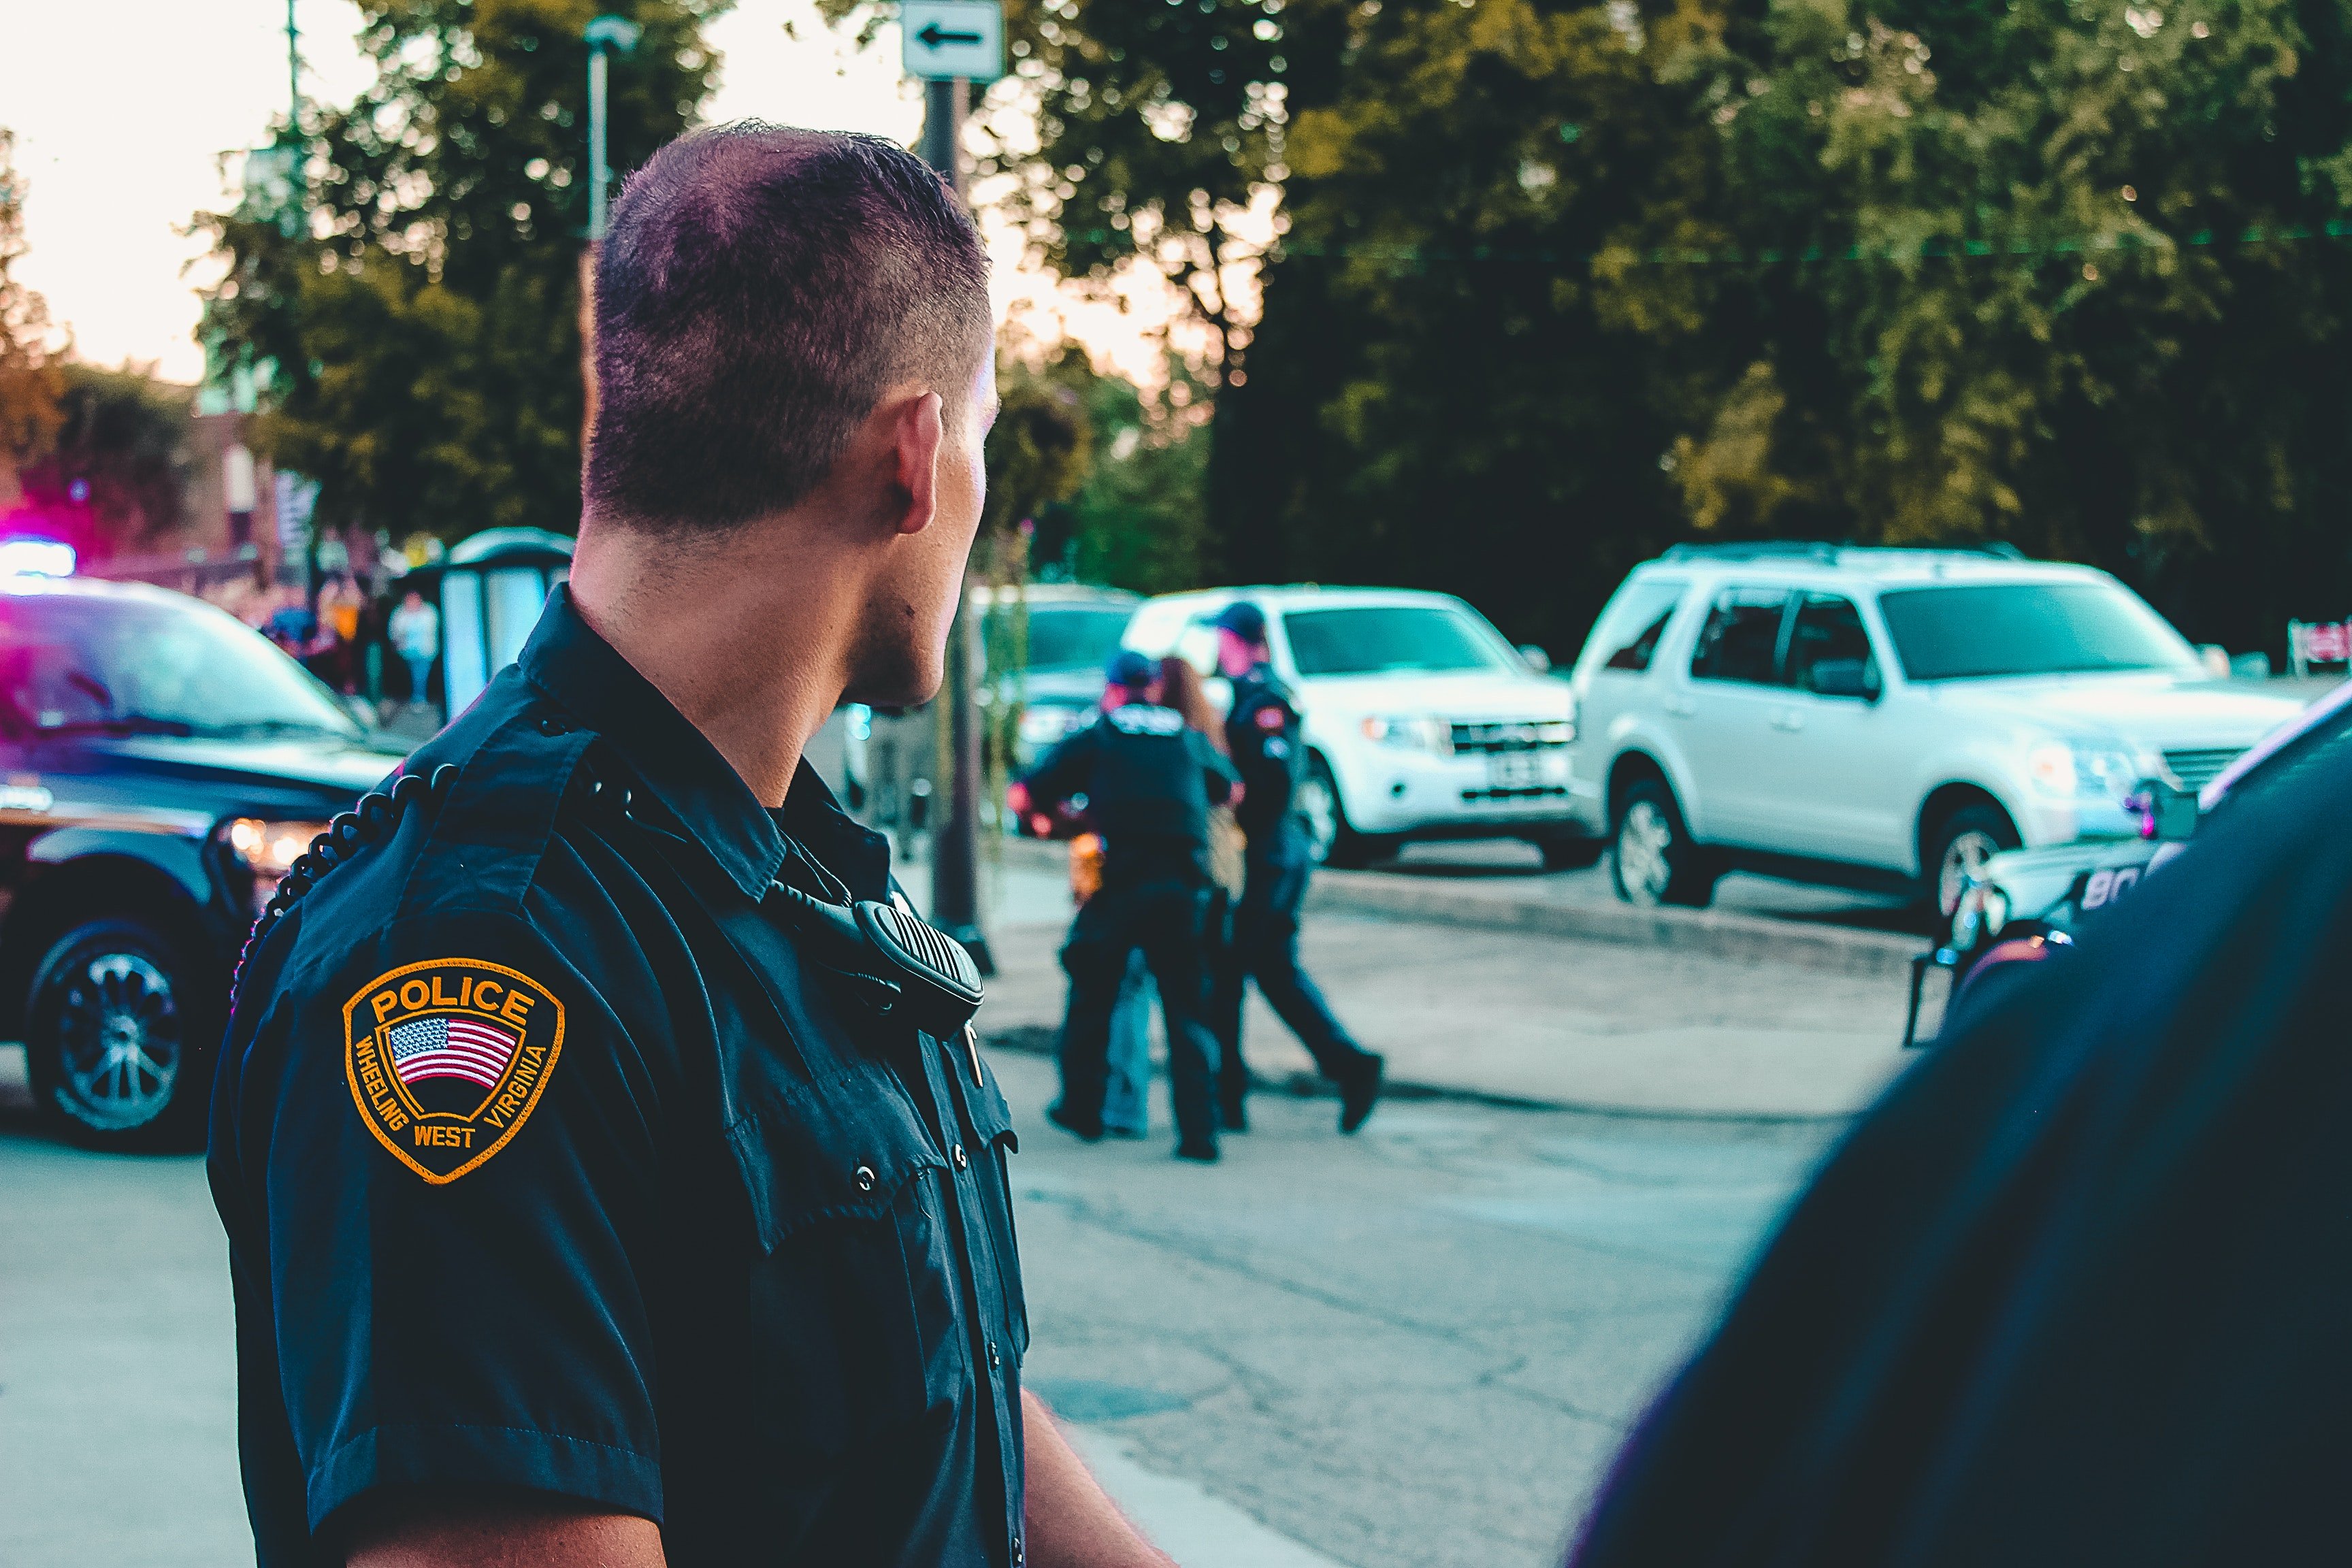 His nephew became a police officer just like him. | Source: Unsplash